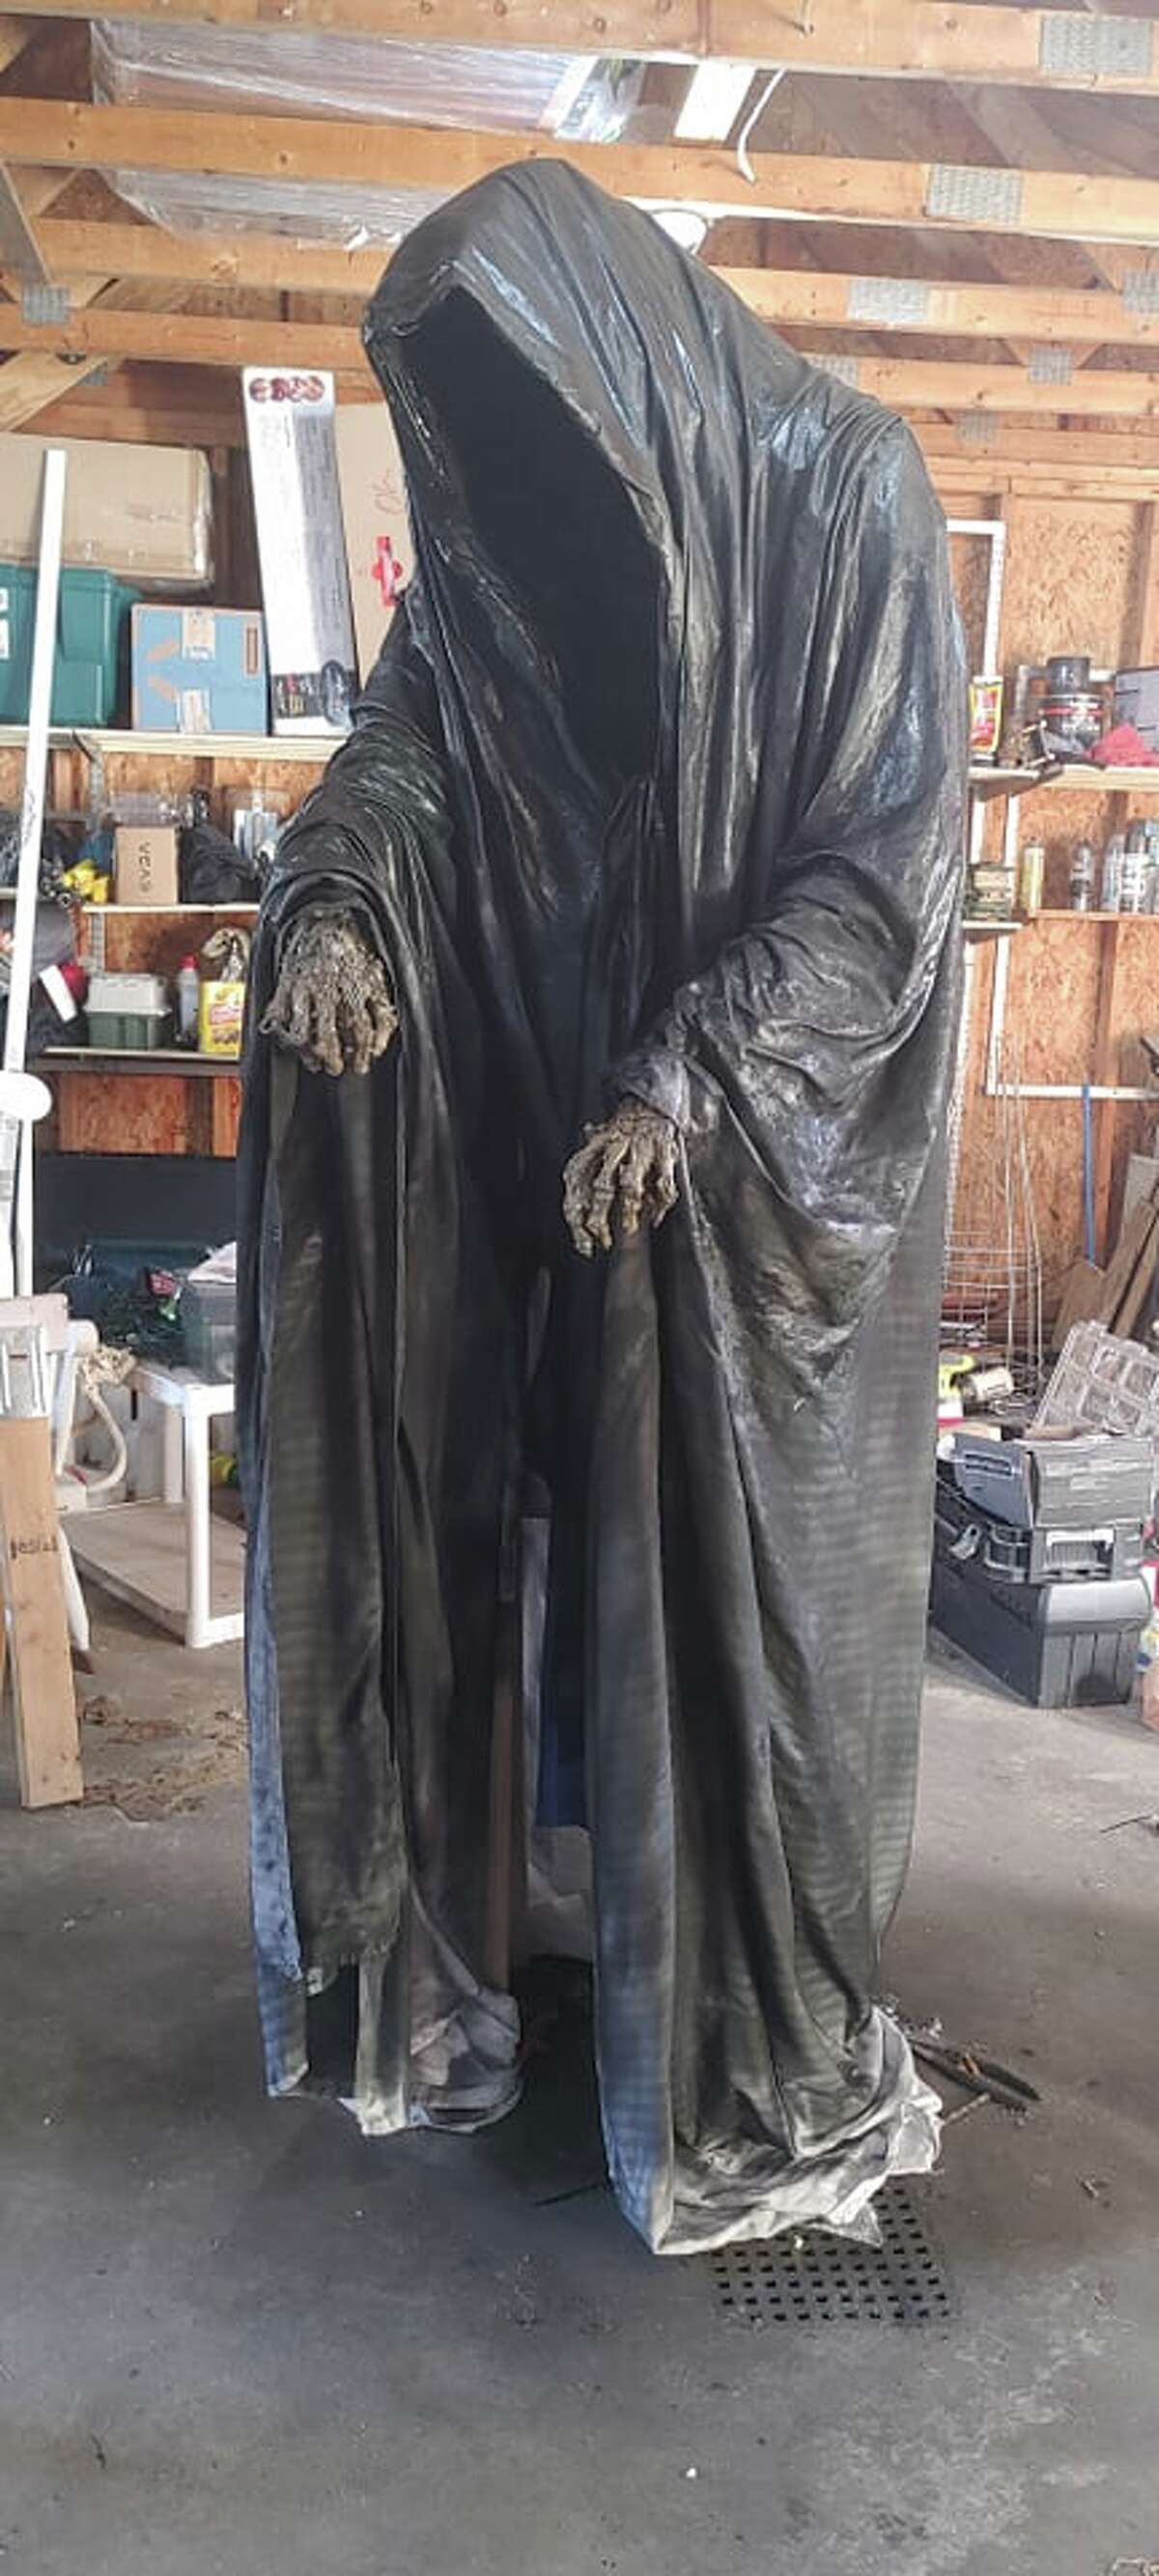 Midland resident Rachael Lyon's 7-foot wraith, an undead creature or spirit, that she and her husband made this year. The couple is waiting to put him out until closer to Halloween.